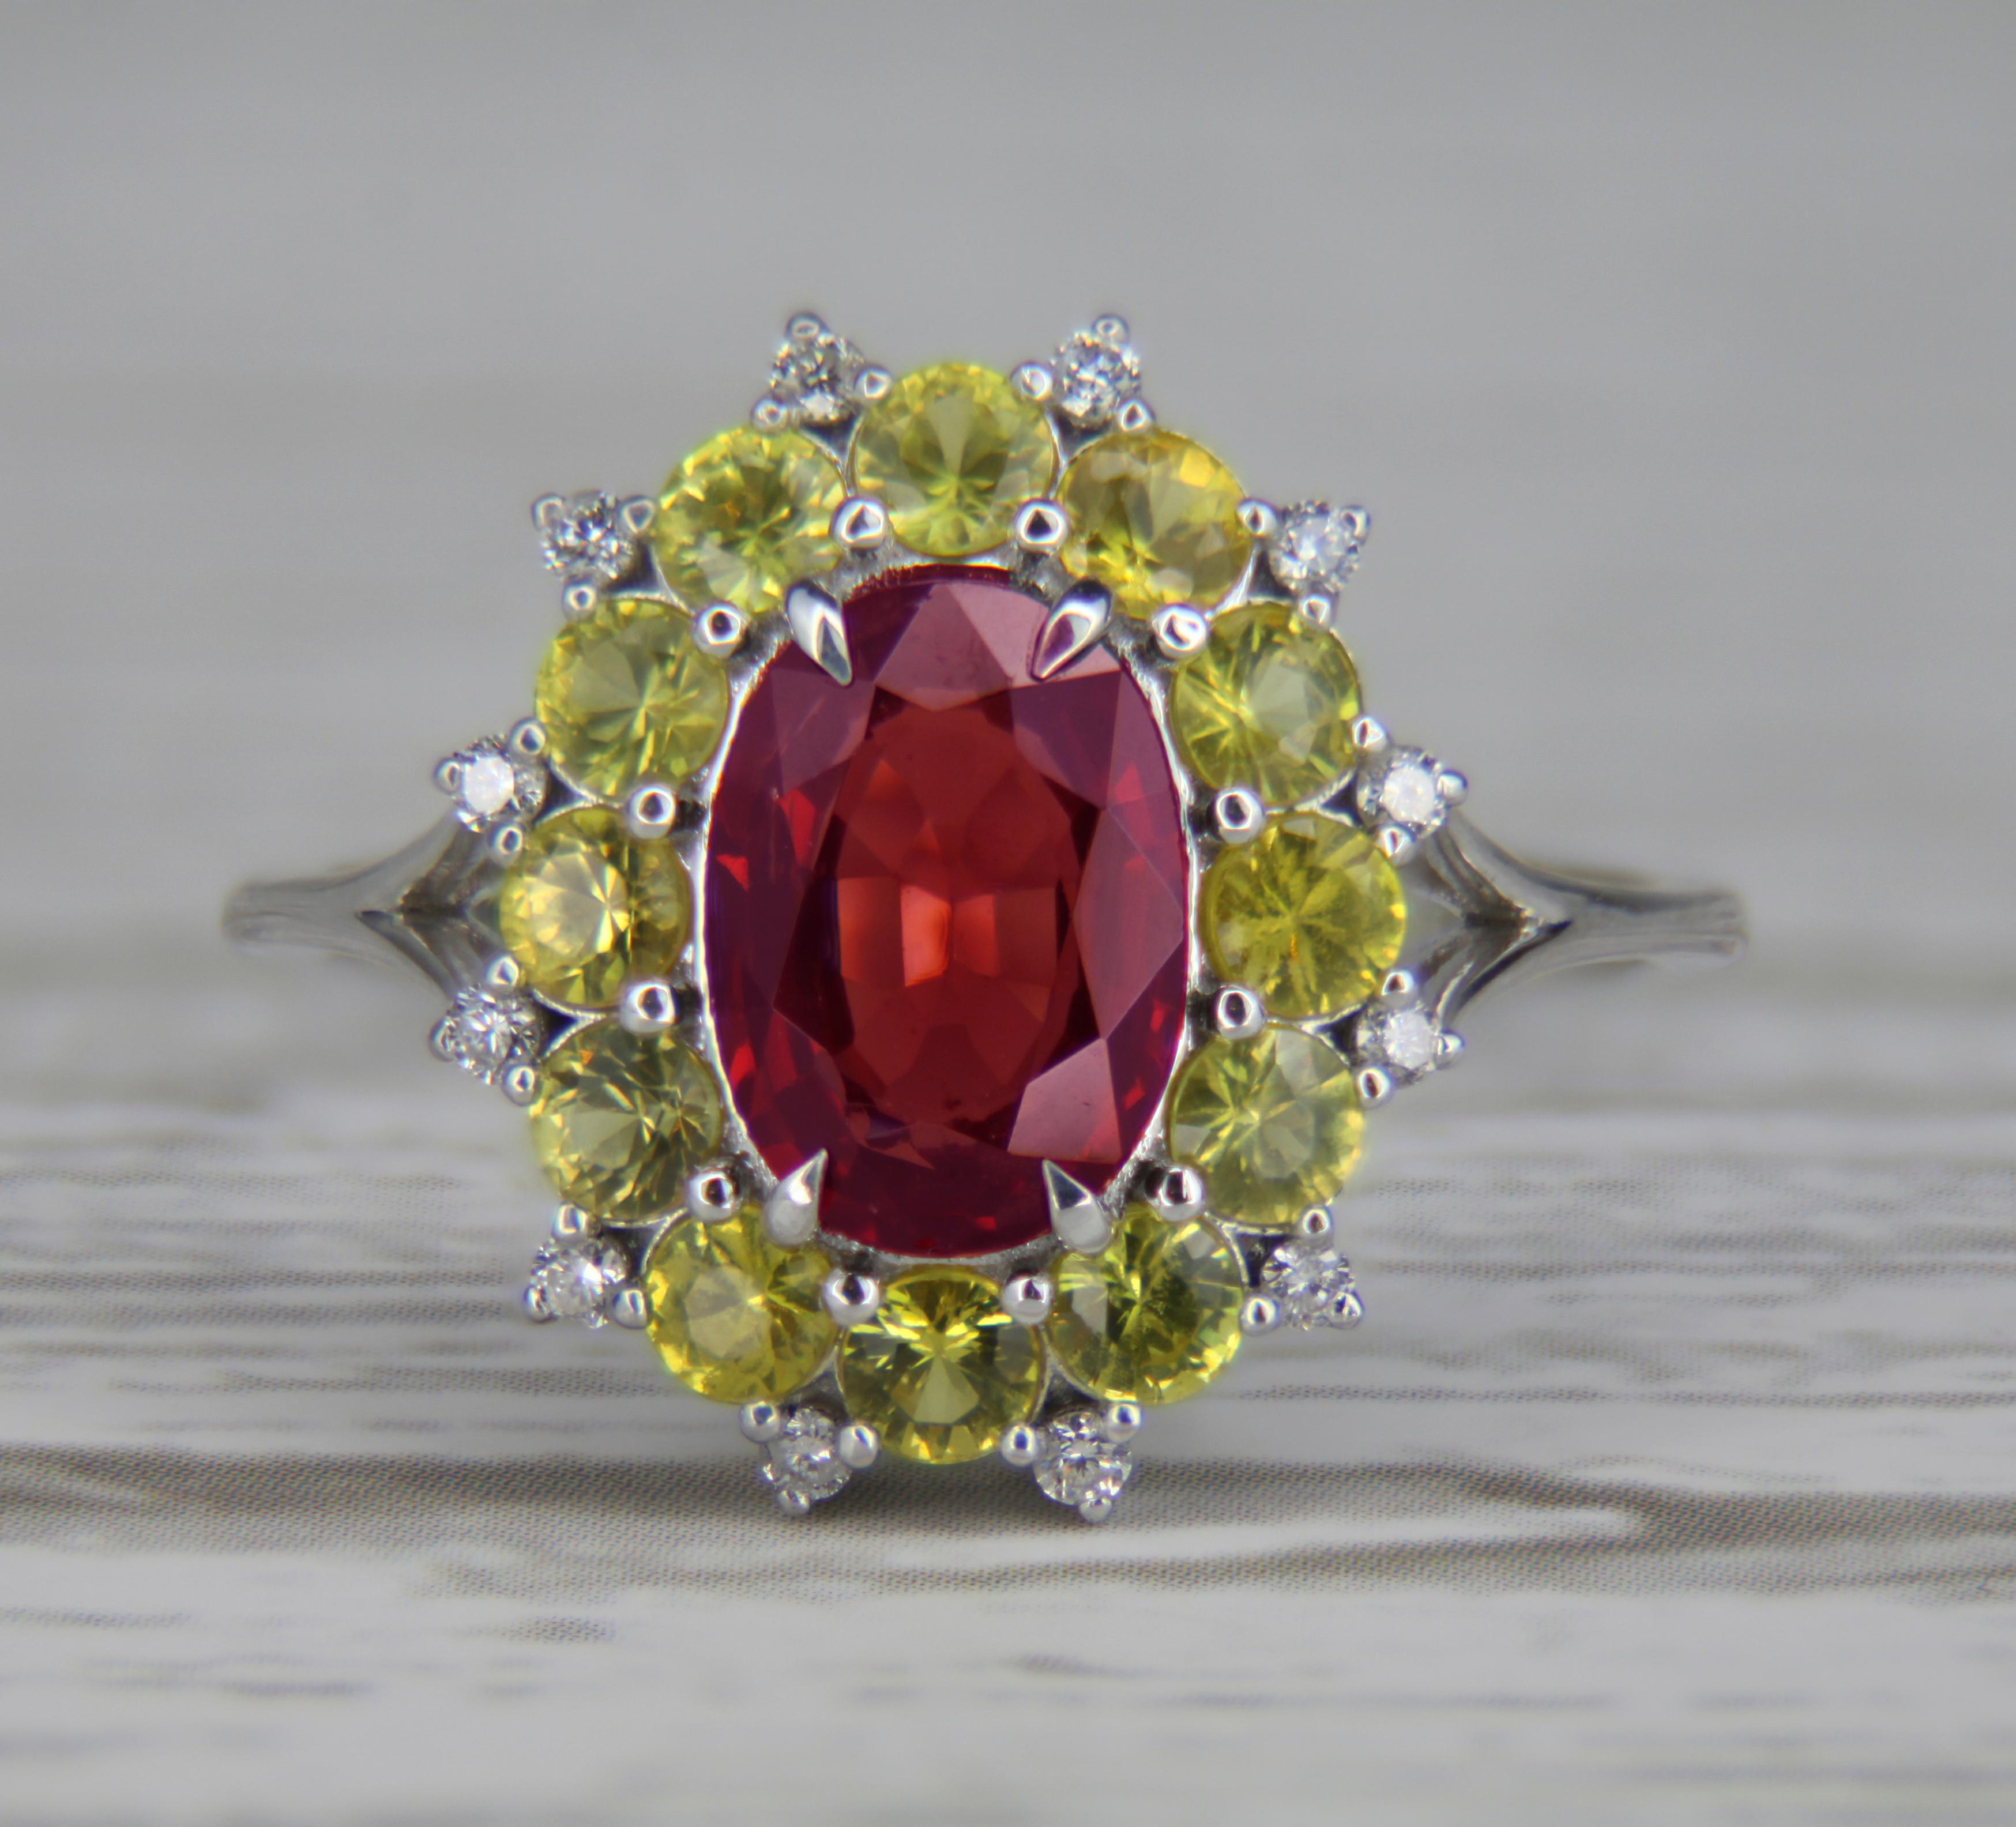 Red garnet, yellow sapphires gold ring. 
Natural garnet 14k gold ring. Oval Garnet Ring. January Birthstone Ring. Garnet statement ring. By Daizy Jewellery.

Metal: 14k gold
Weight: 2.5 g. depends from size

Central stone: Natural garnet
Weight - 